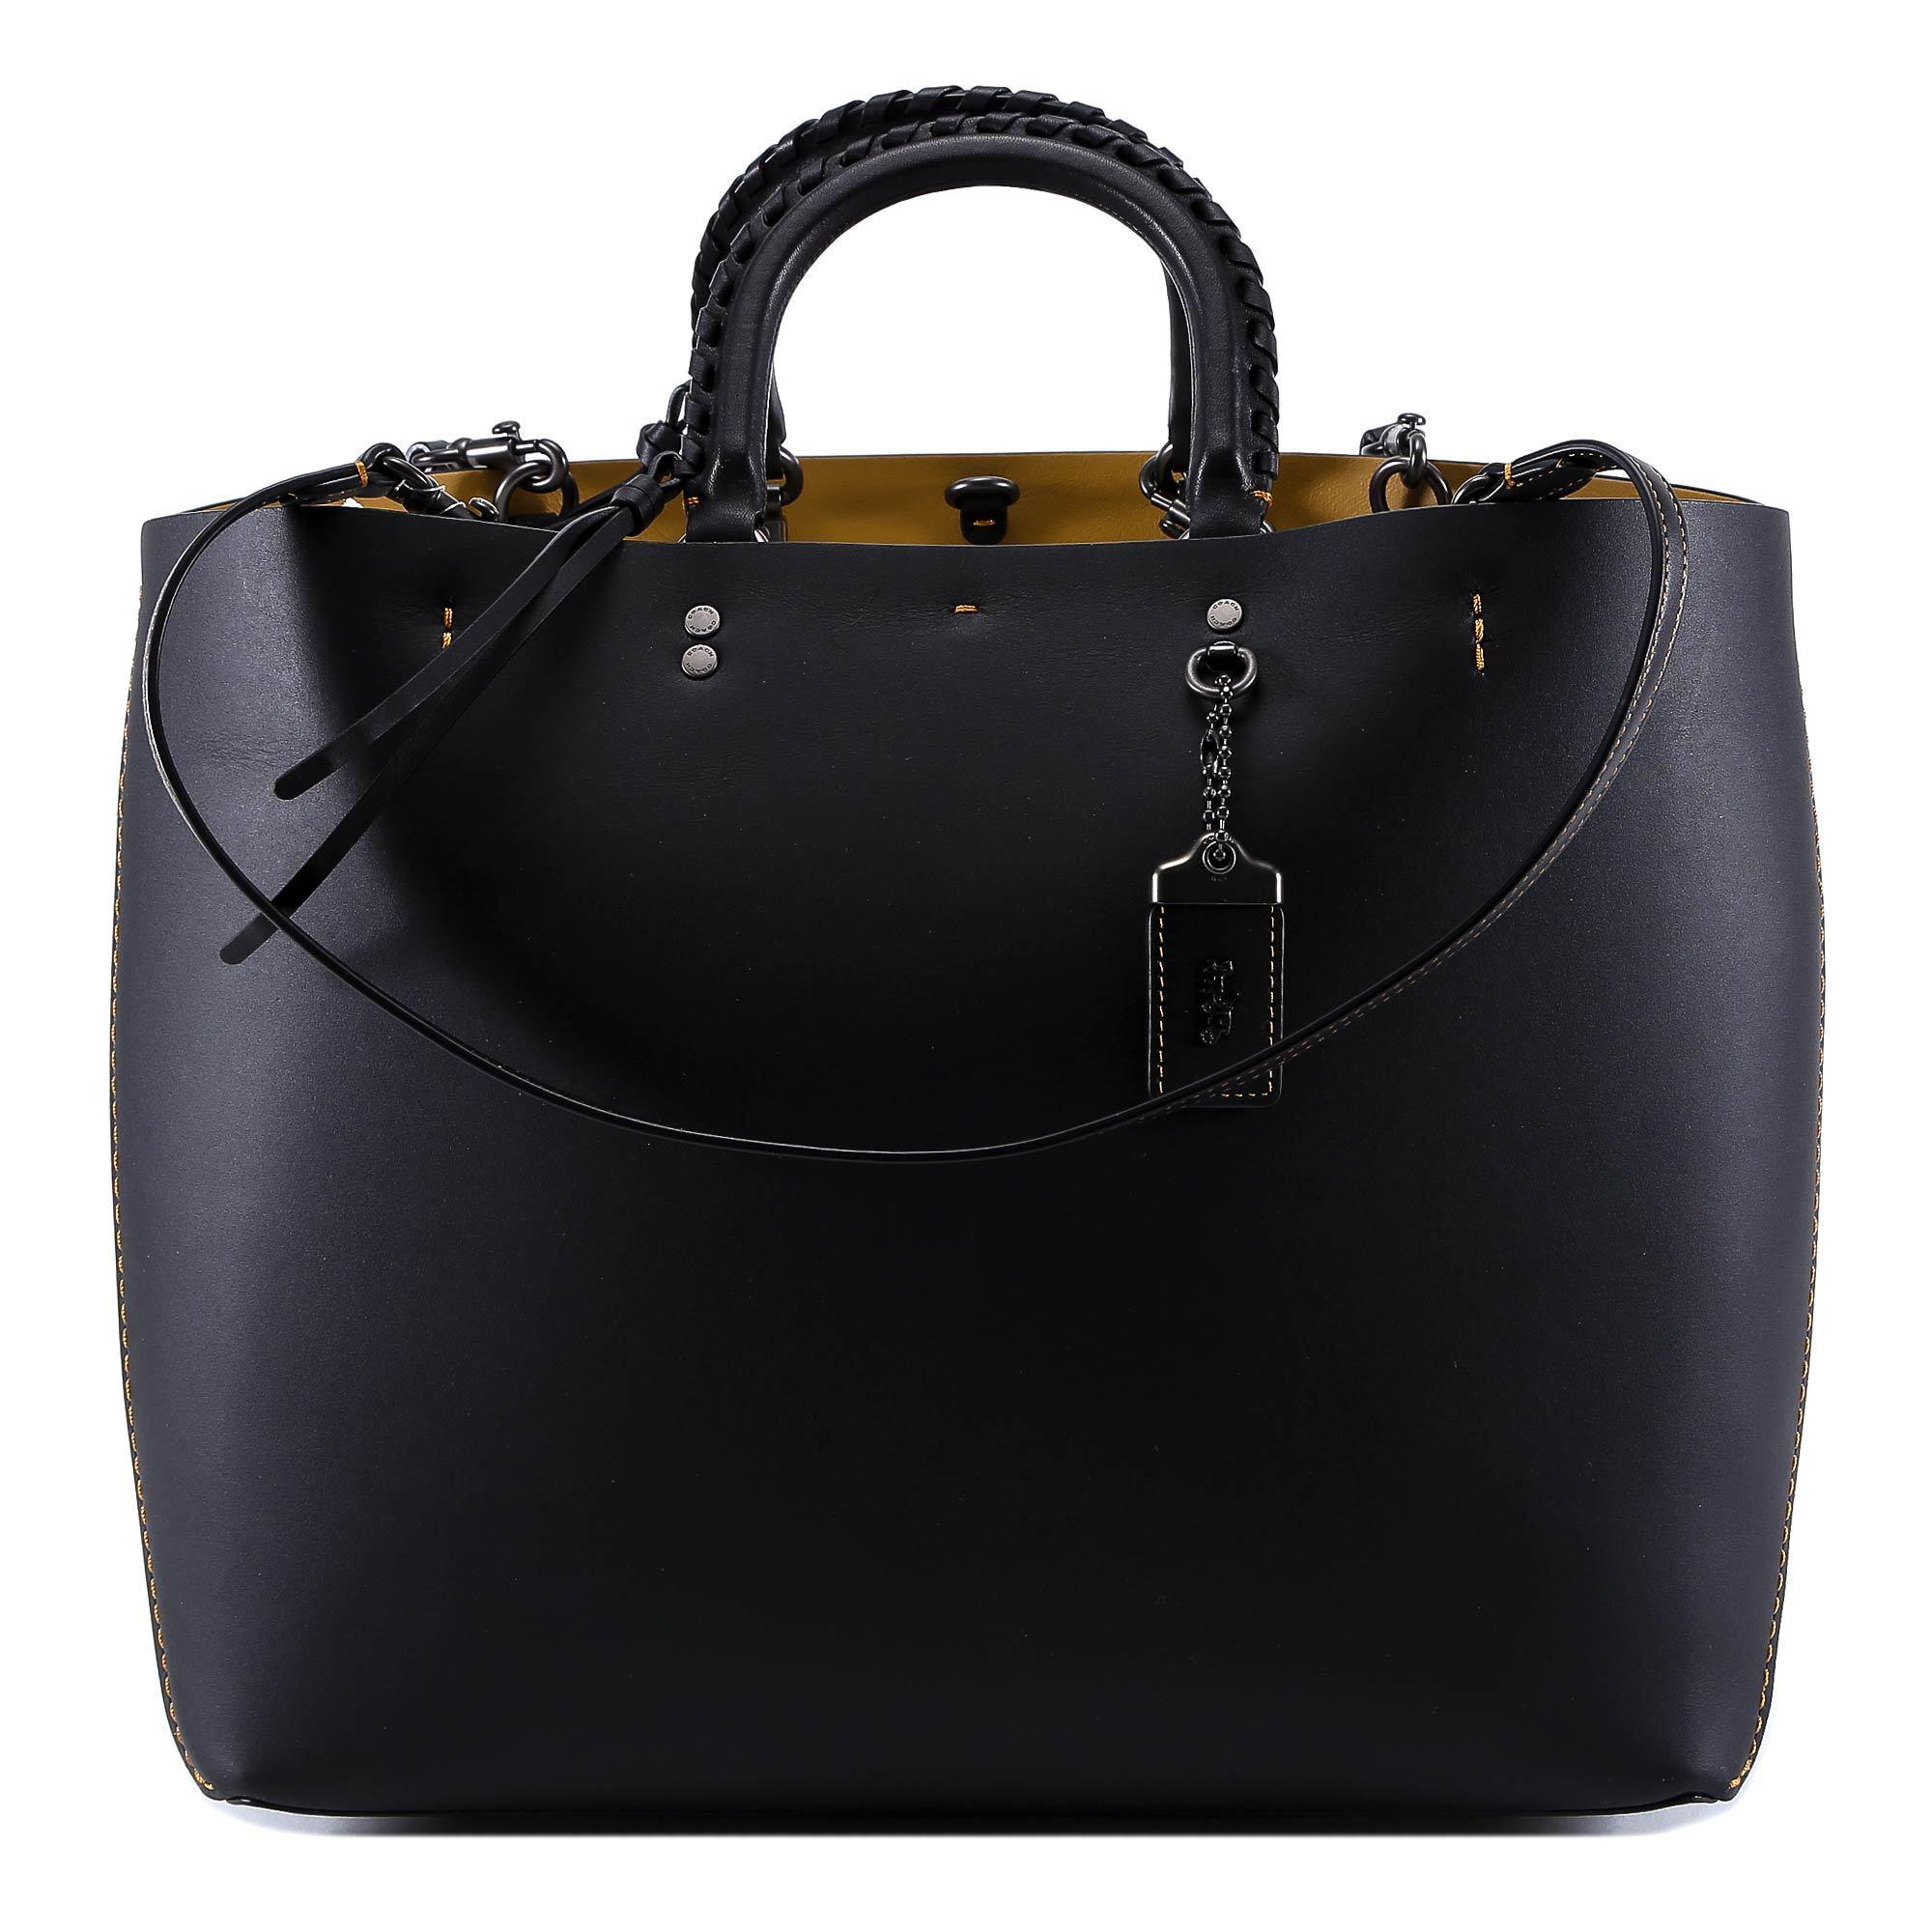 COACH Leather Rogue Tote Bag in Black - Lyst